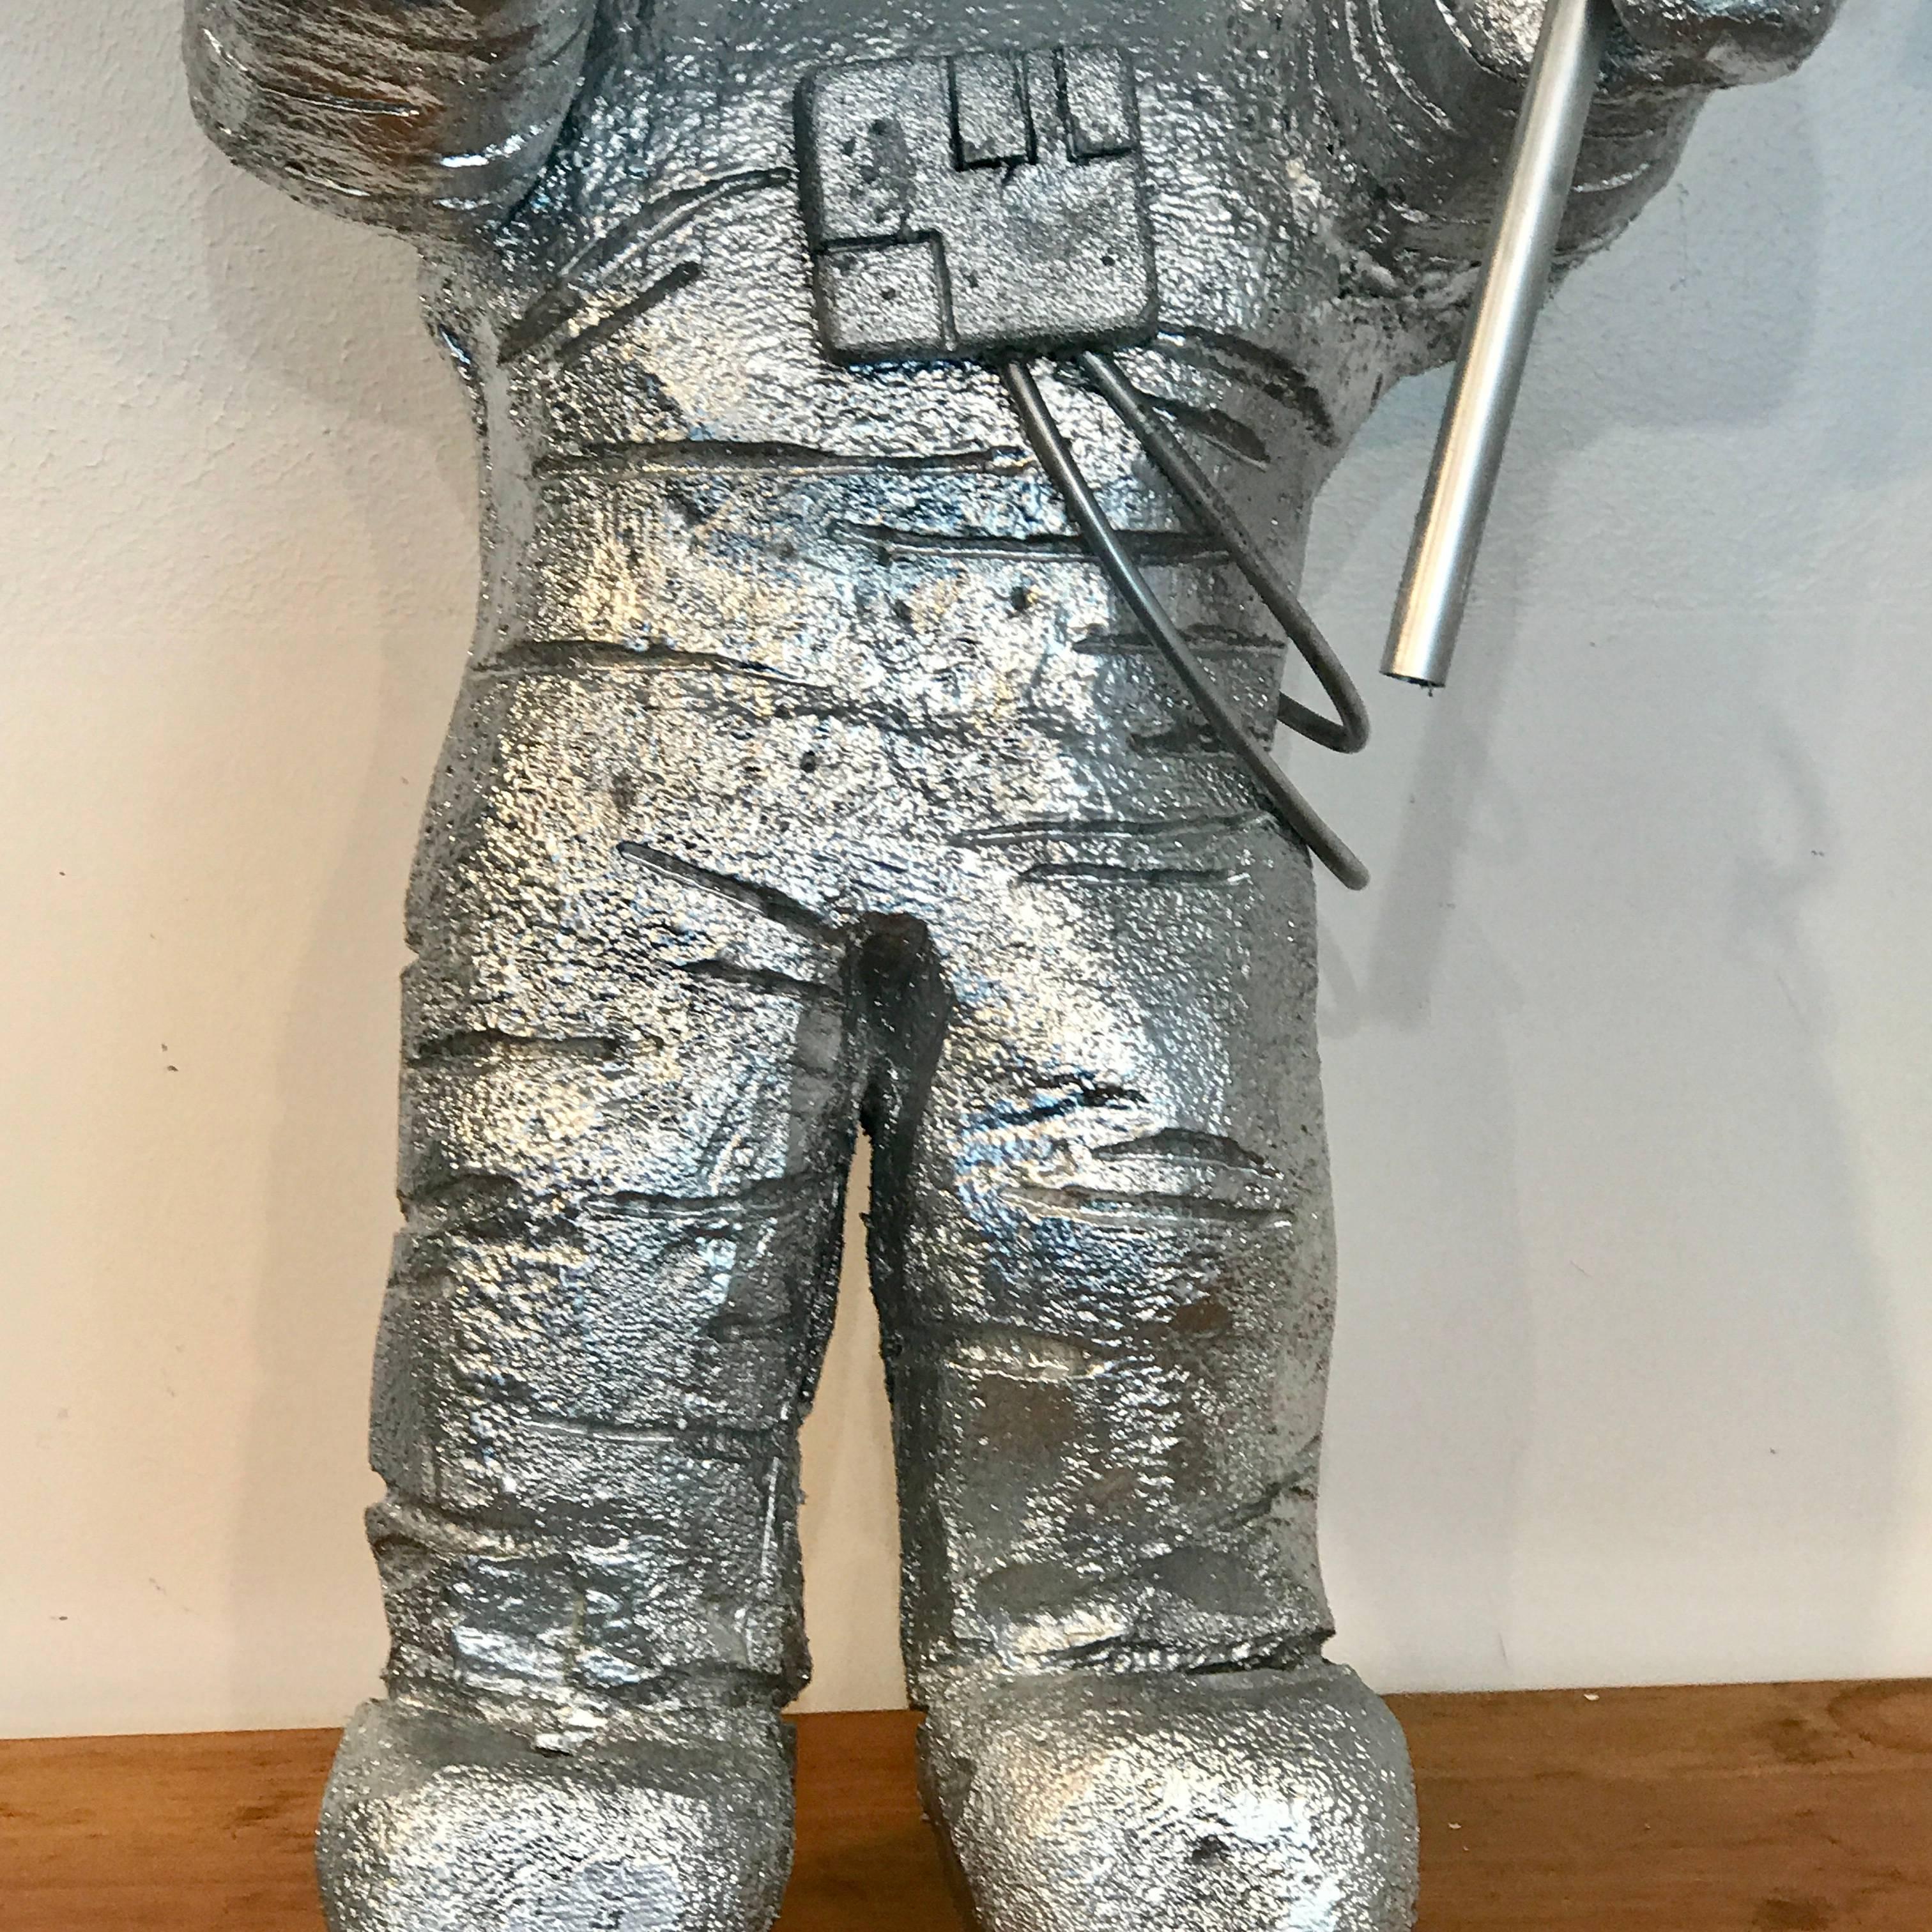 MTV Moonman Prop, A vintage realistically carved and modeled figure of the iconic MoonPerson out of blocks styrofoam, rubber, paperboard and other found prepared materials
Standing 40